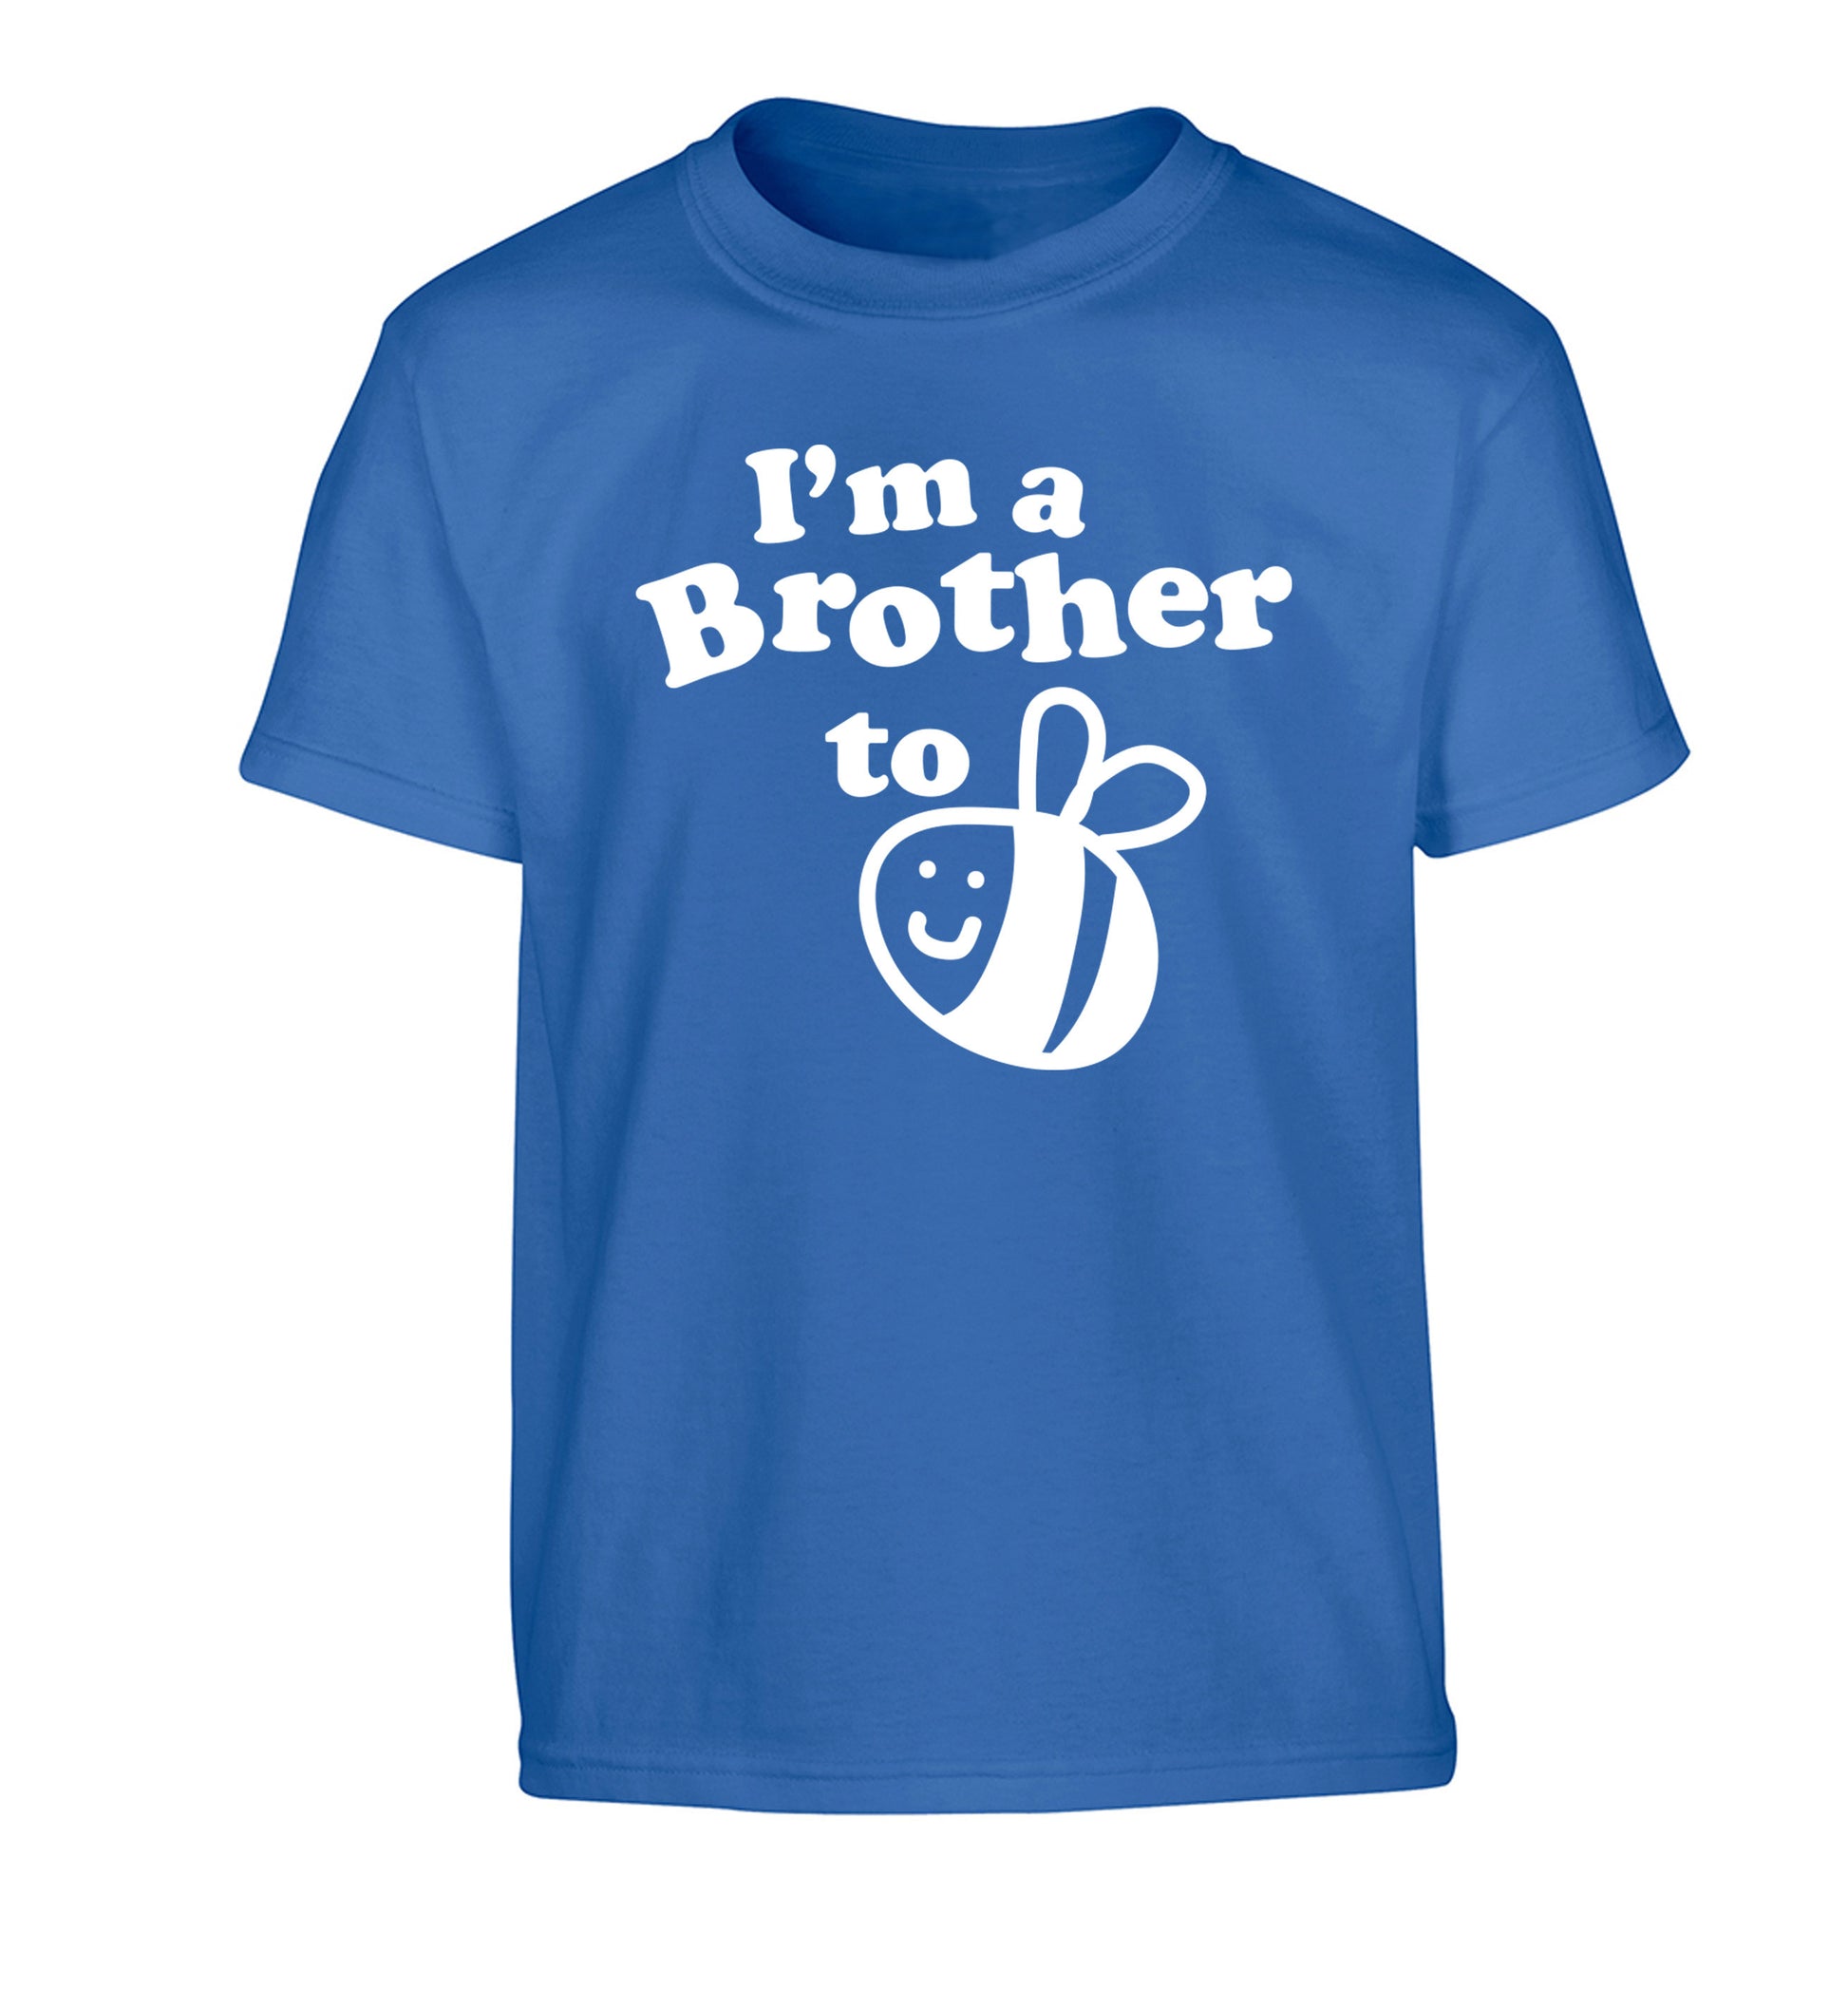 I'm a brother to be Children's blue Tshirt 12-14 Years